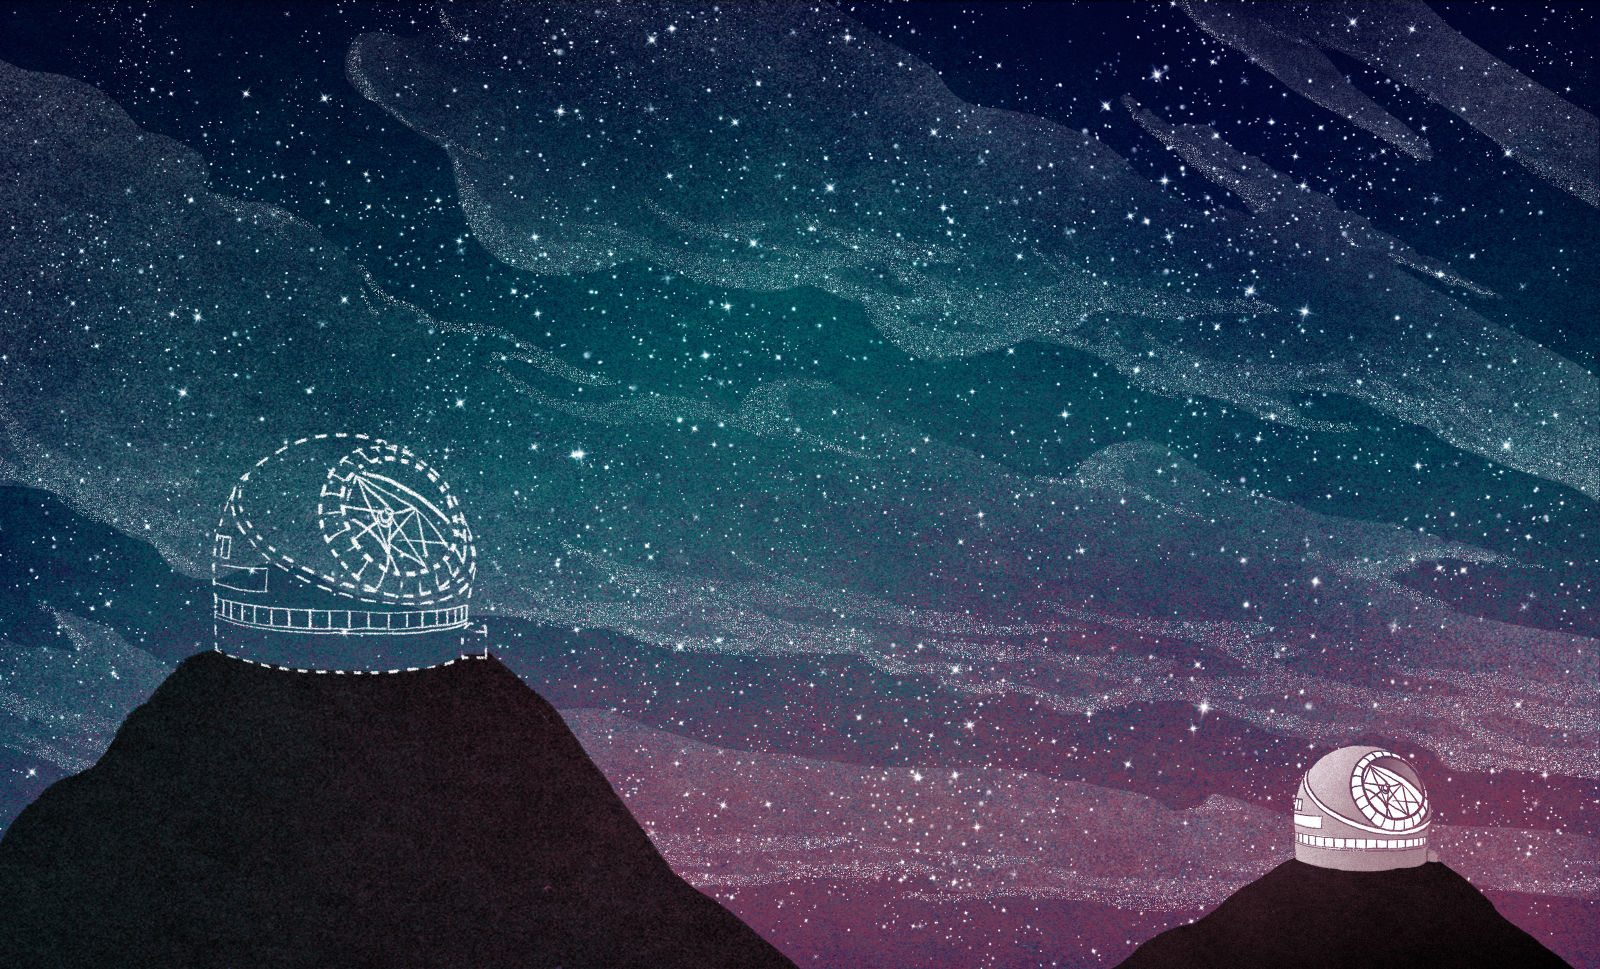 A fight over a sacred mountaintop will shape the future of astronomy